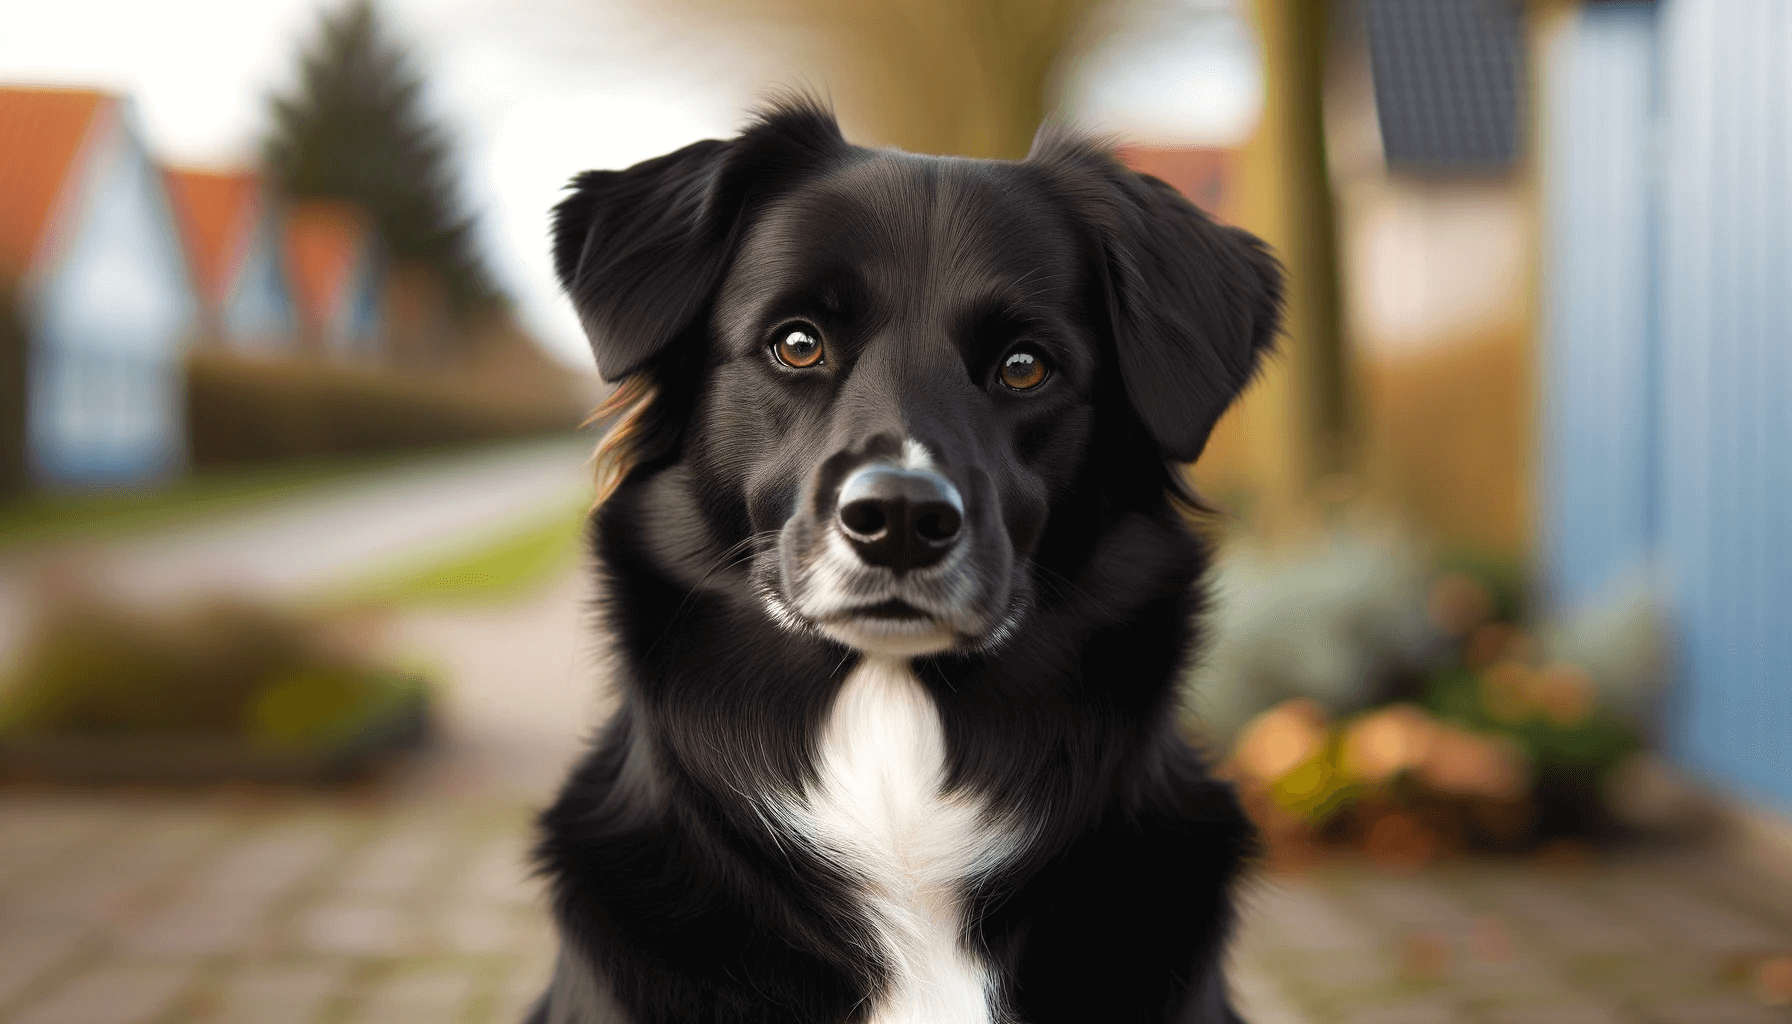 Mature Borador Border Collie Lab Mix with a sleek black coat and a white chest.